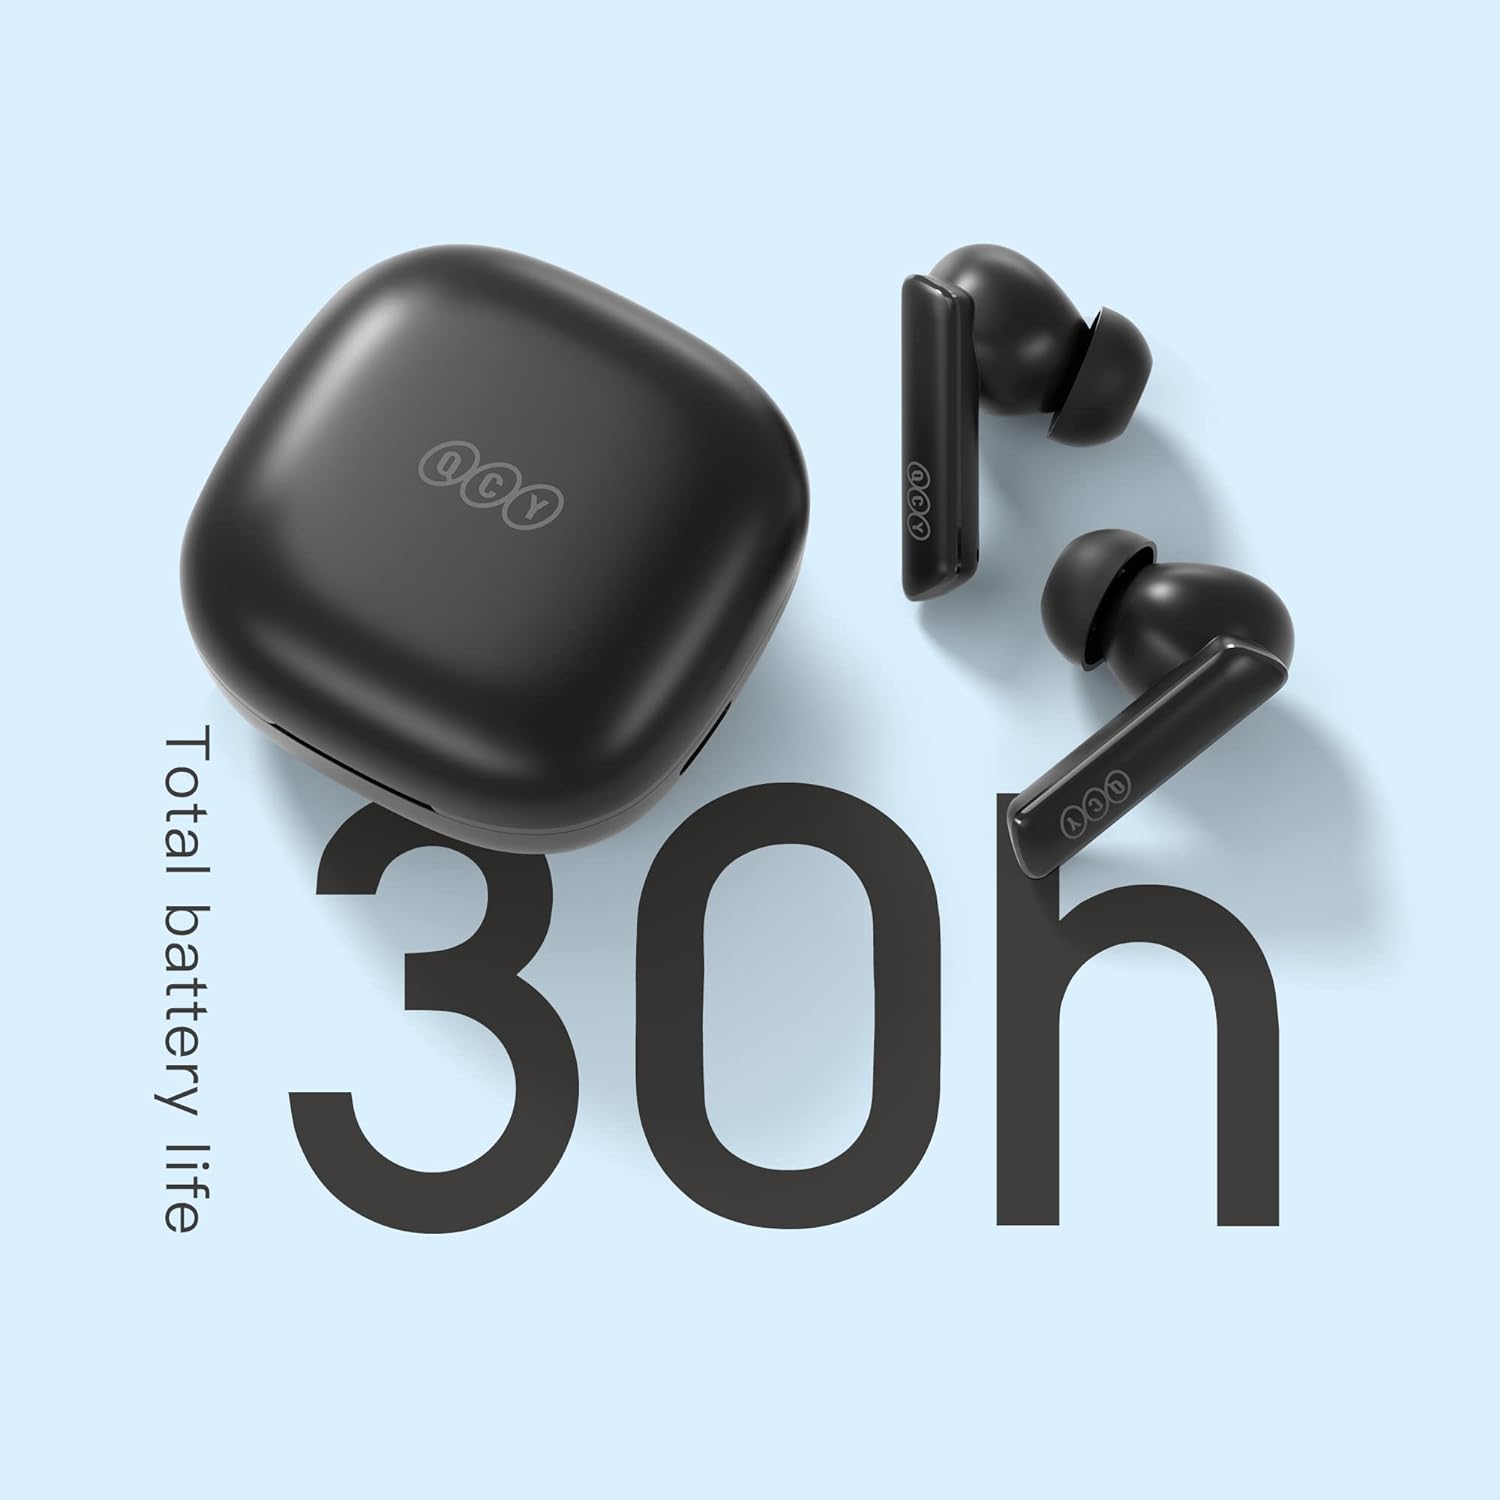 QCY HT05 MeloBuds ANC Wireless Earphone - Black